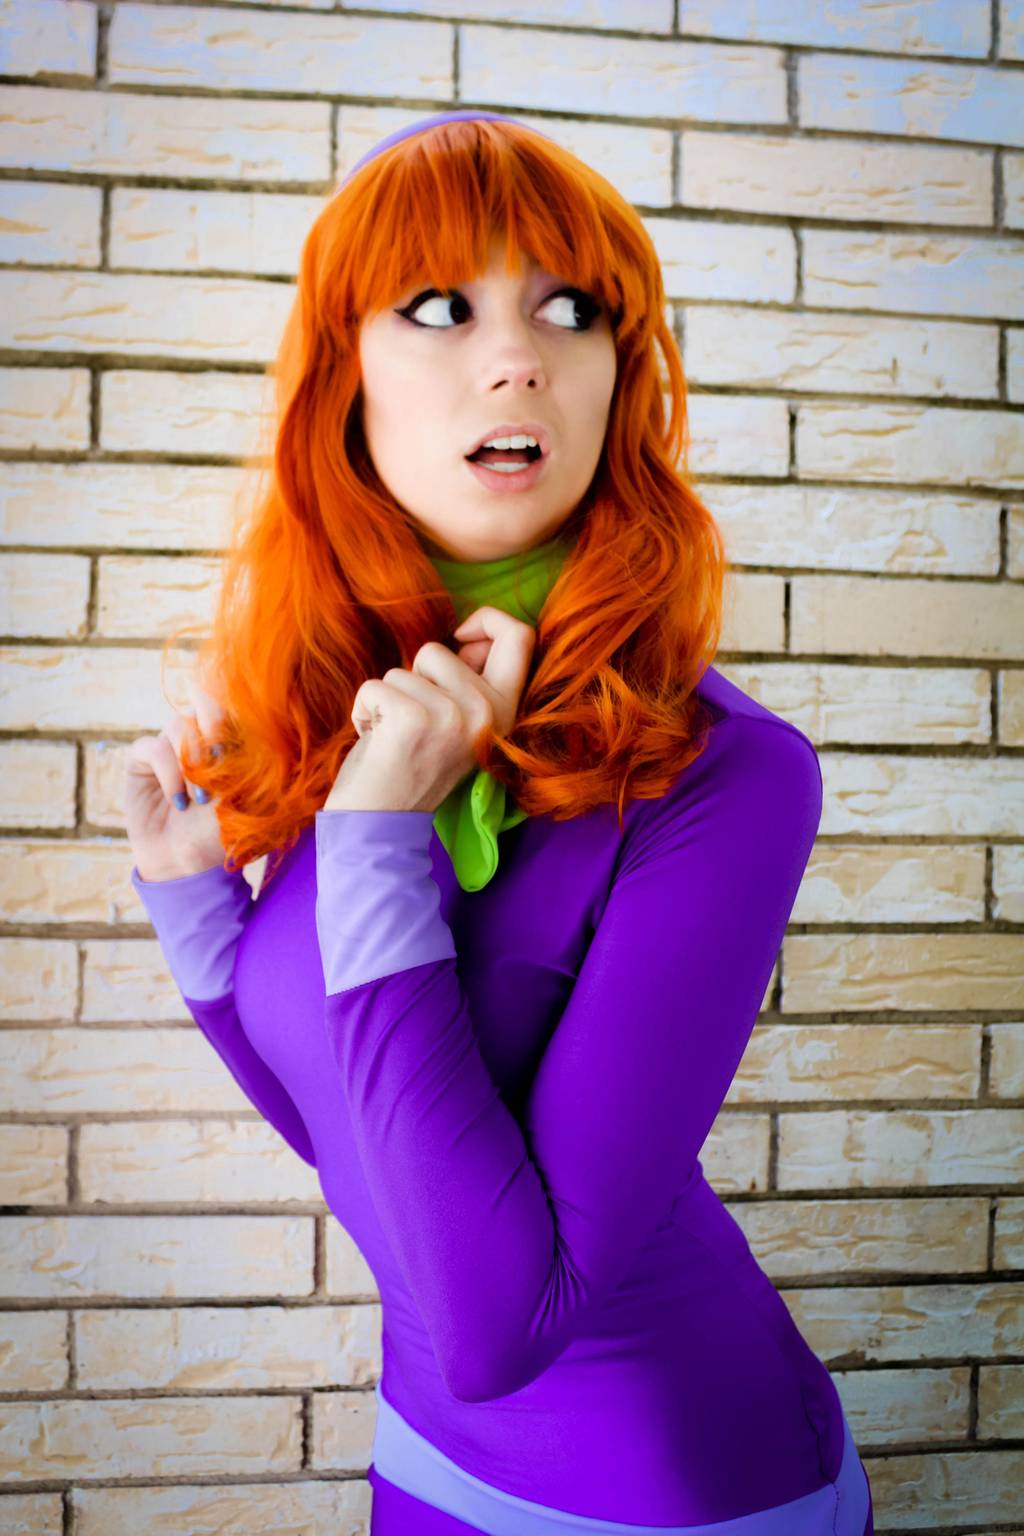 70+ Hot Pictures Of Daphne Blake From Scooby Doo Which Are Sure to Catch Your Attention 44